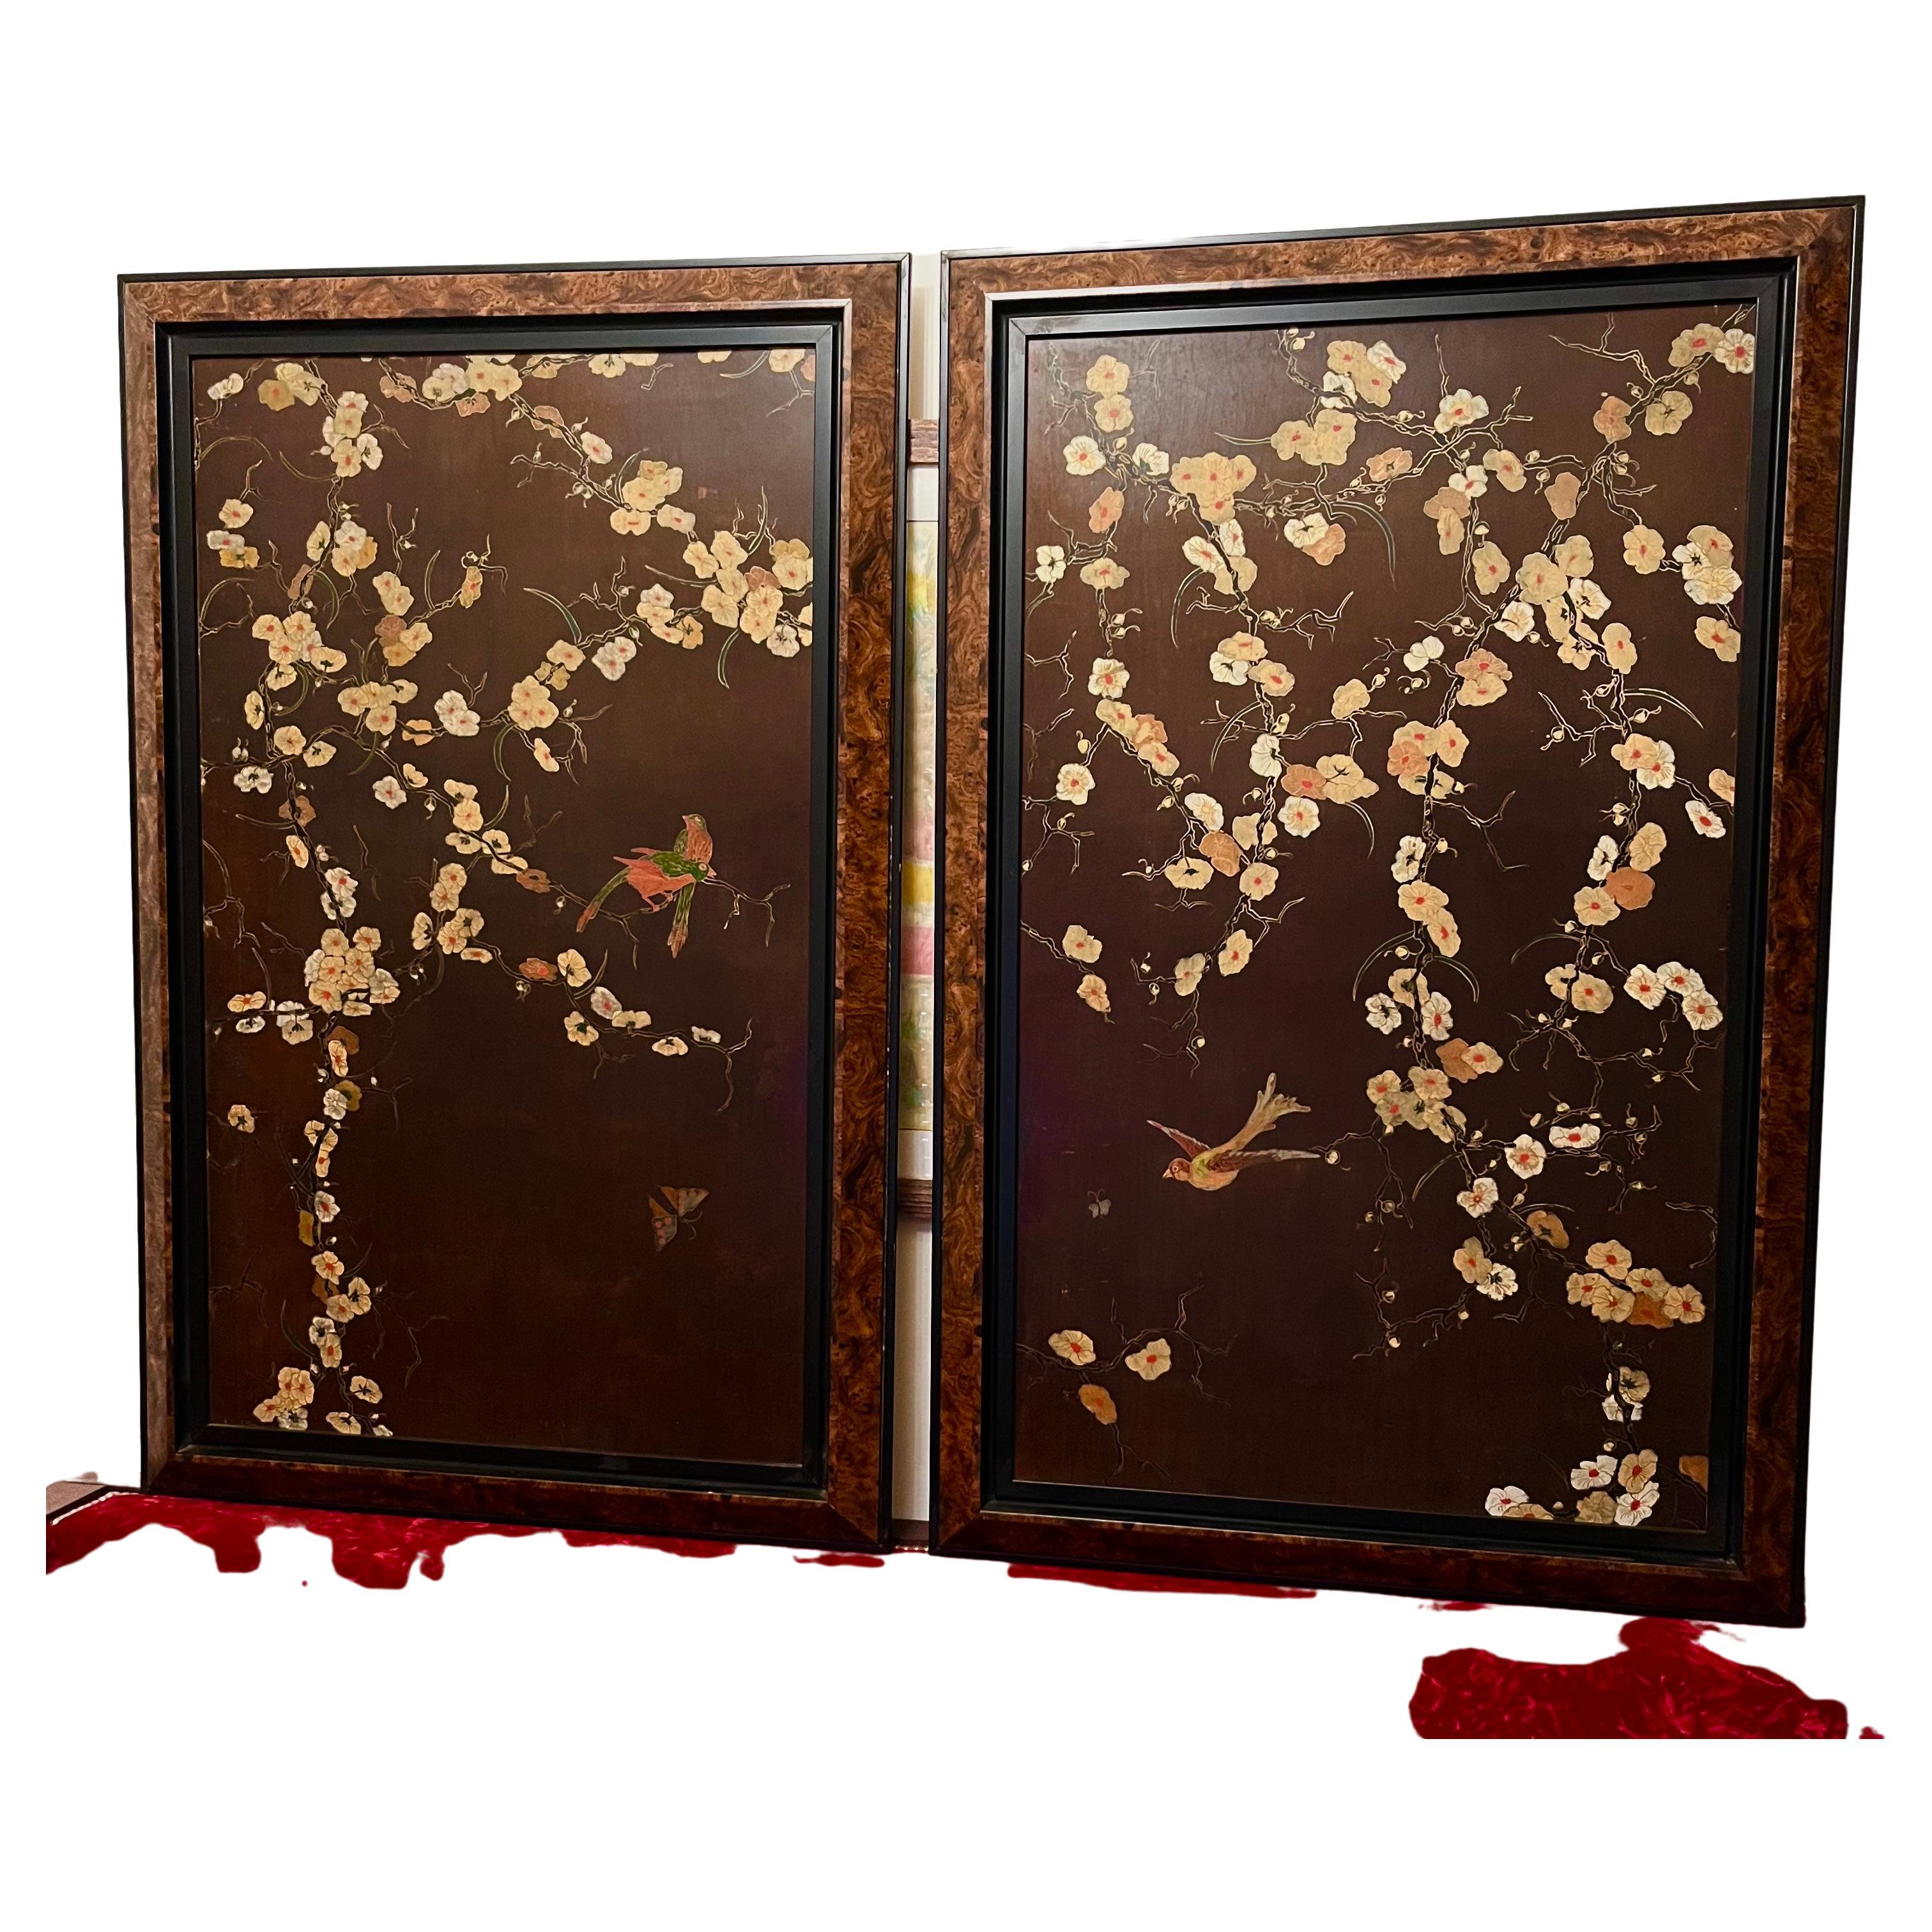 Pair of brown Lacquer on Wood Panels Art Nouveau Floral Japanese Style .